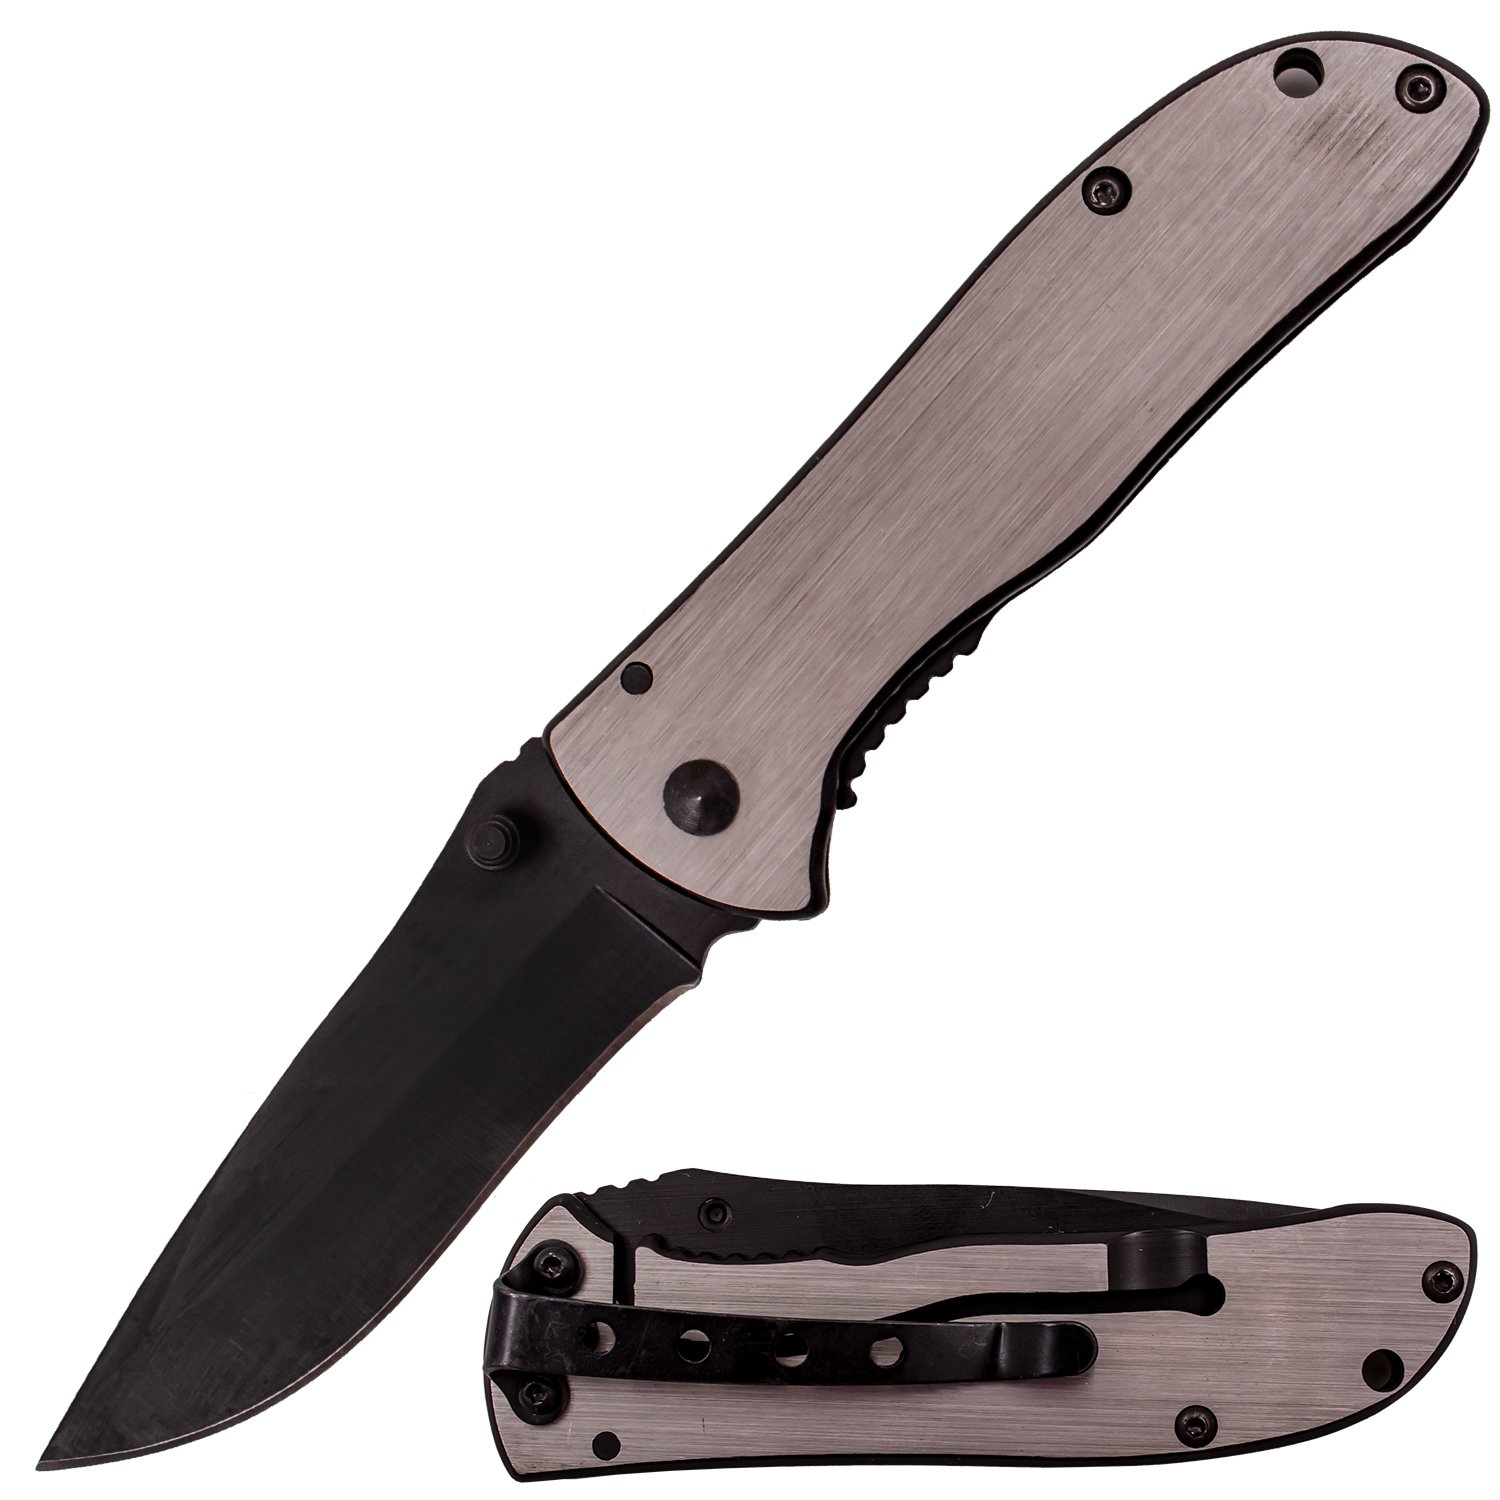 7 Inch MANUAL Folding Knife Silver (Stainless Steel Handle)